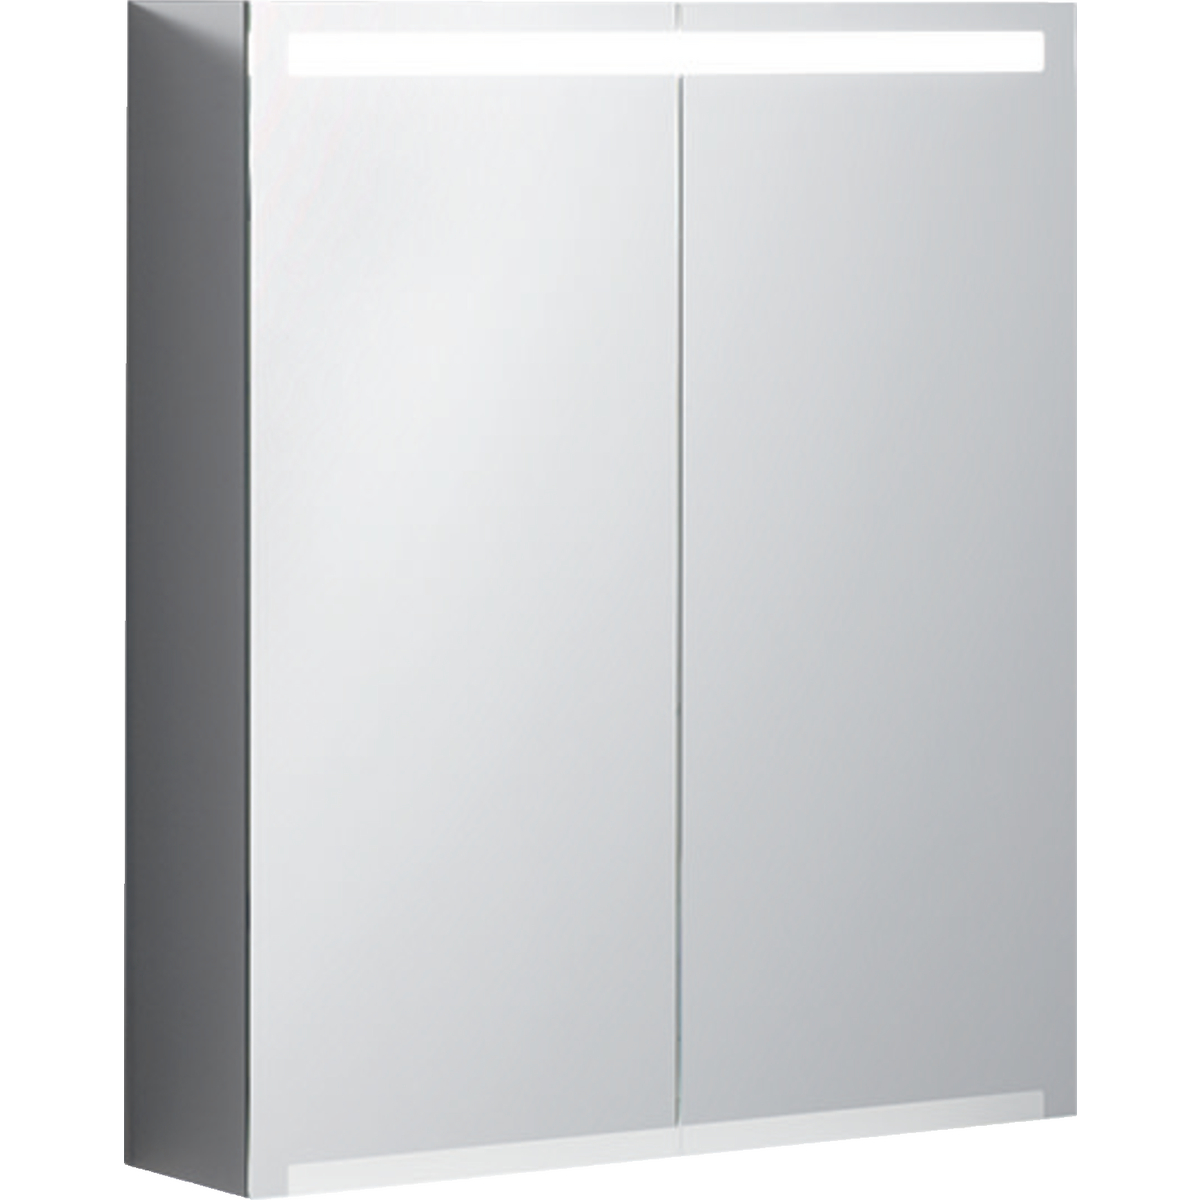 Option mirror cabinet with lighting and two doors - 600mm